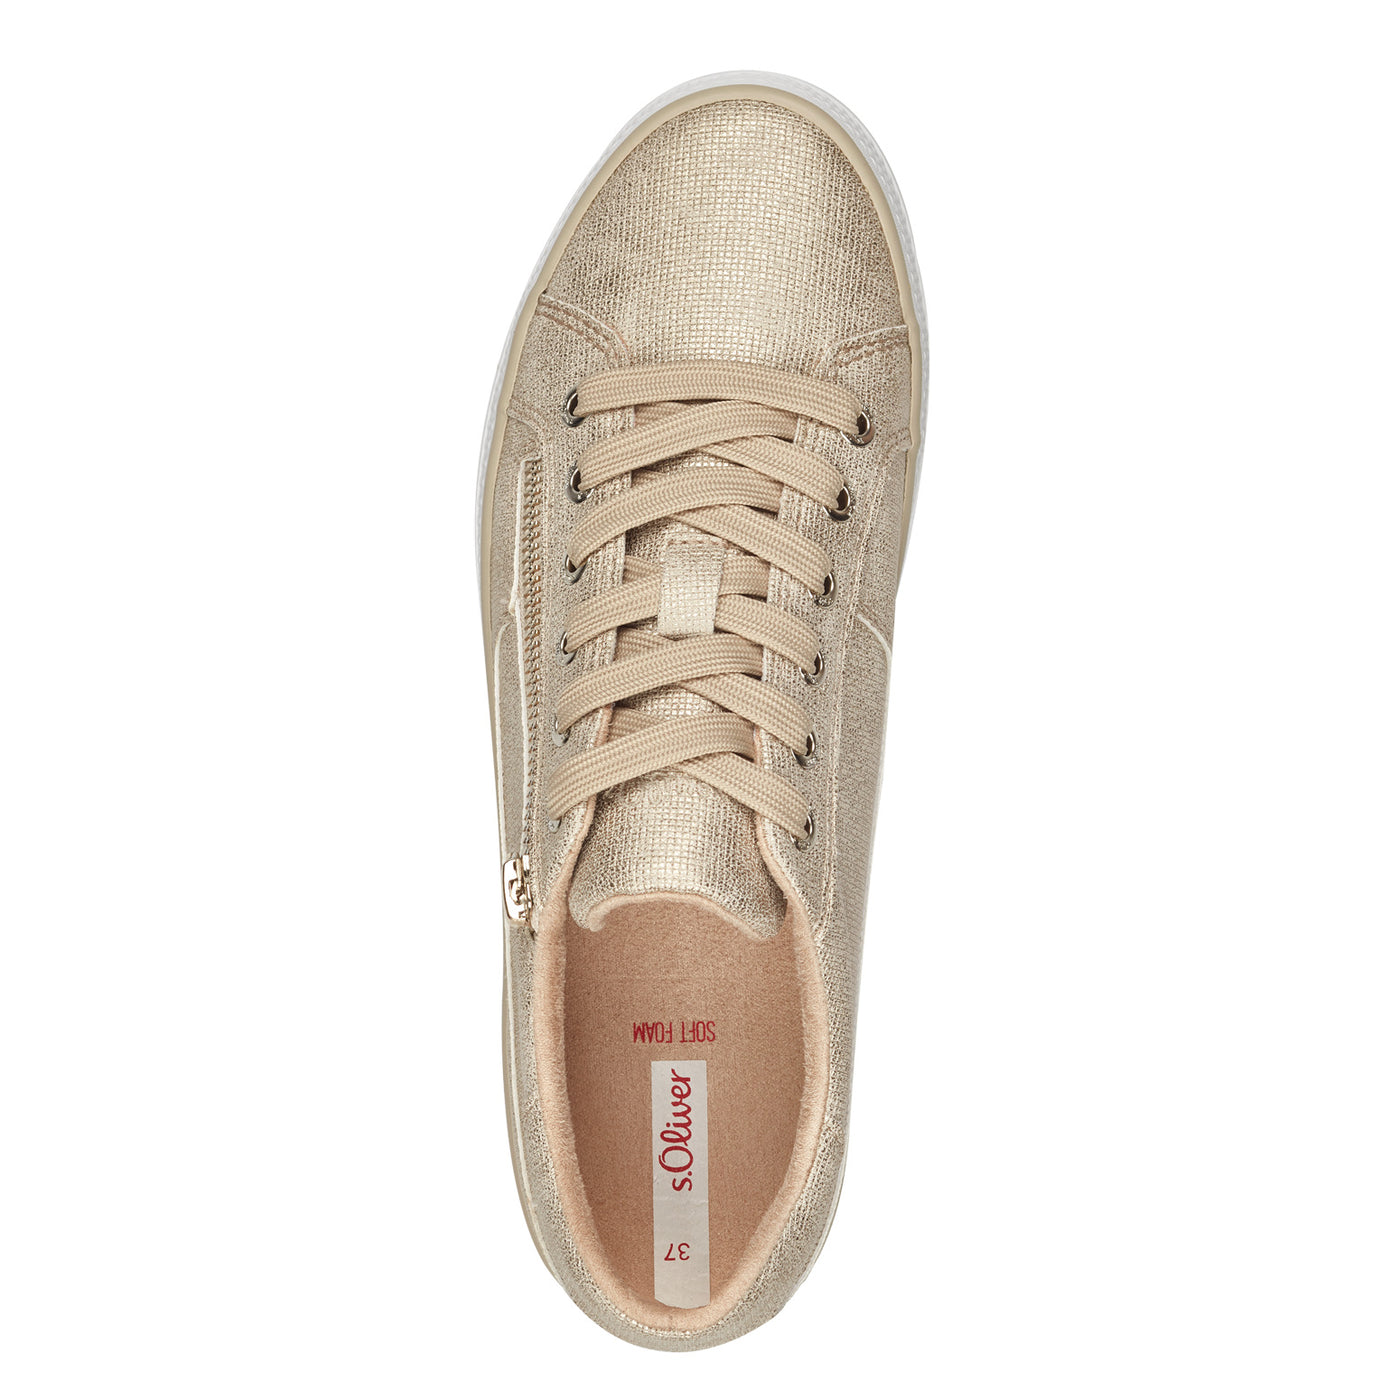 S'OLIVER - 23615-444 FLAT ZIP/LACE TRAINER - GOLD